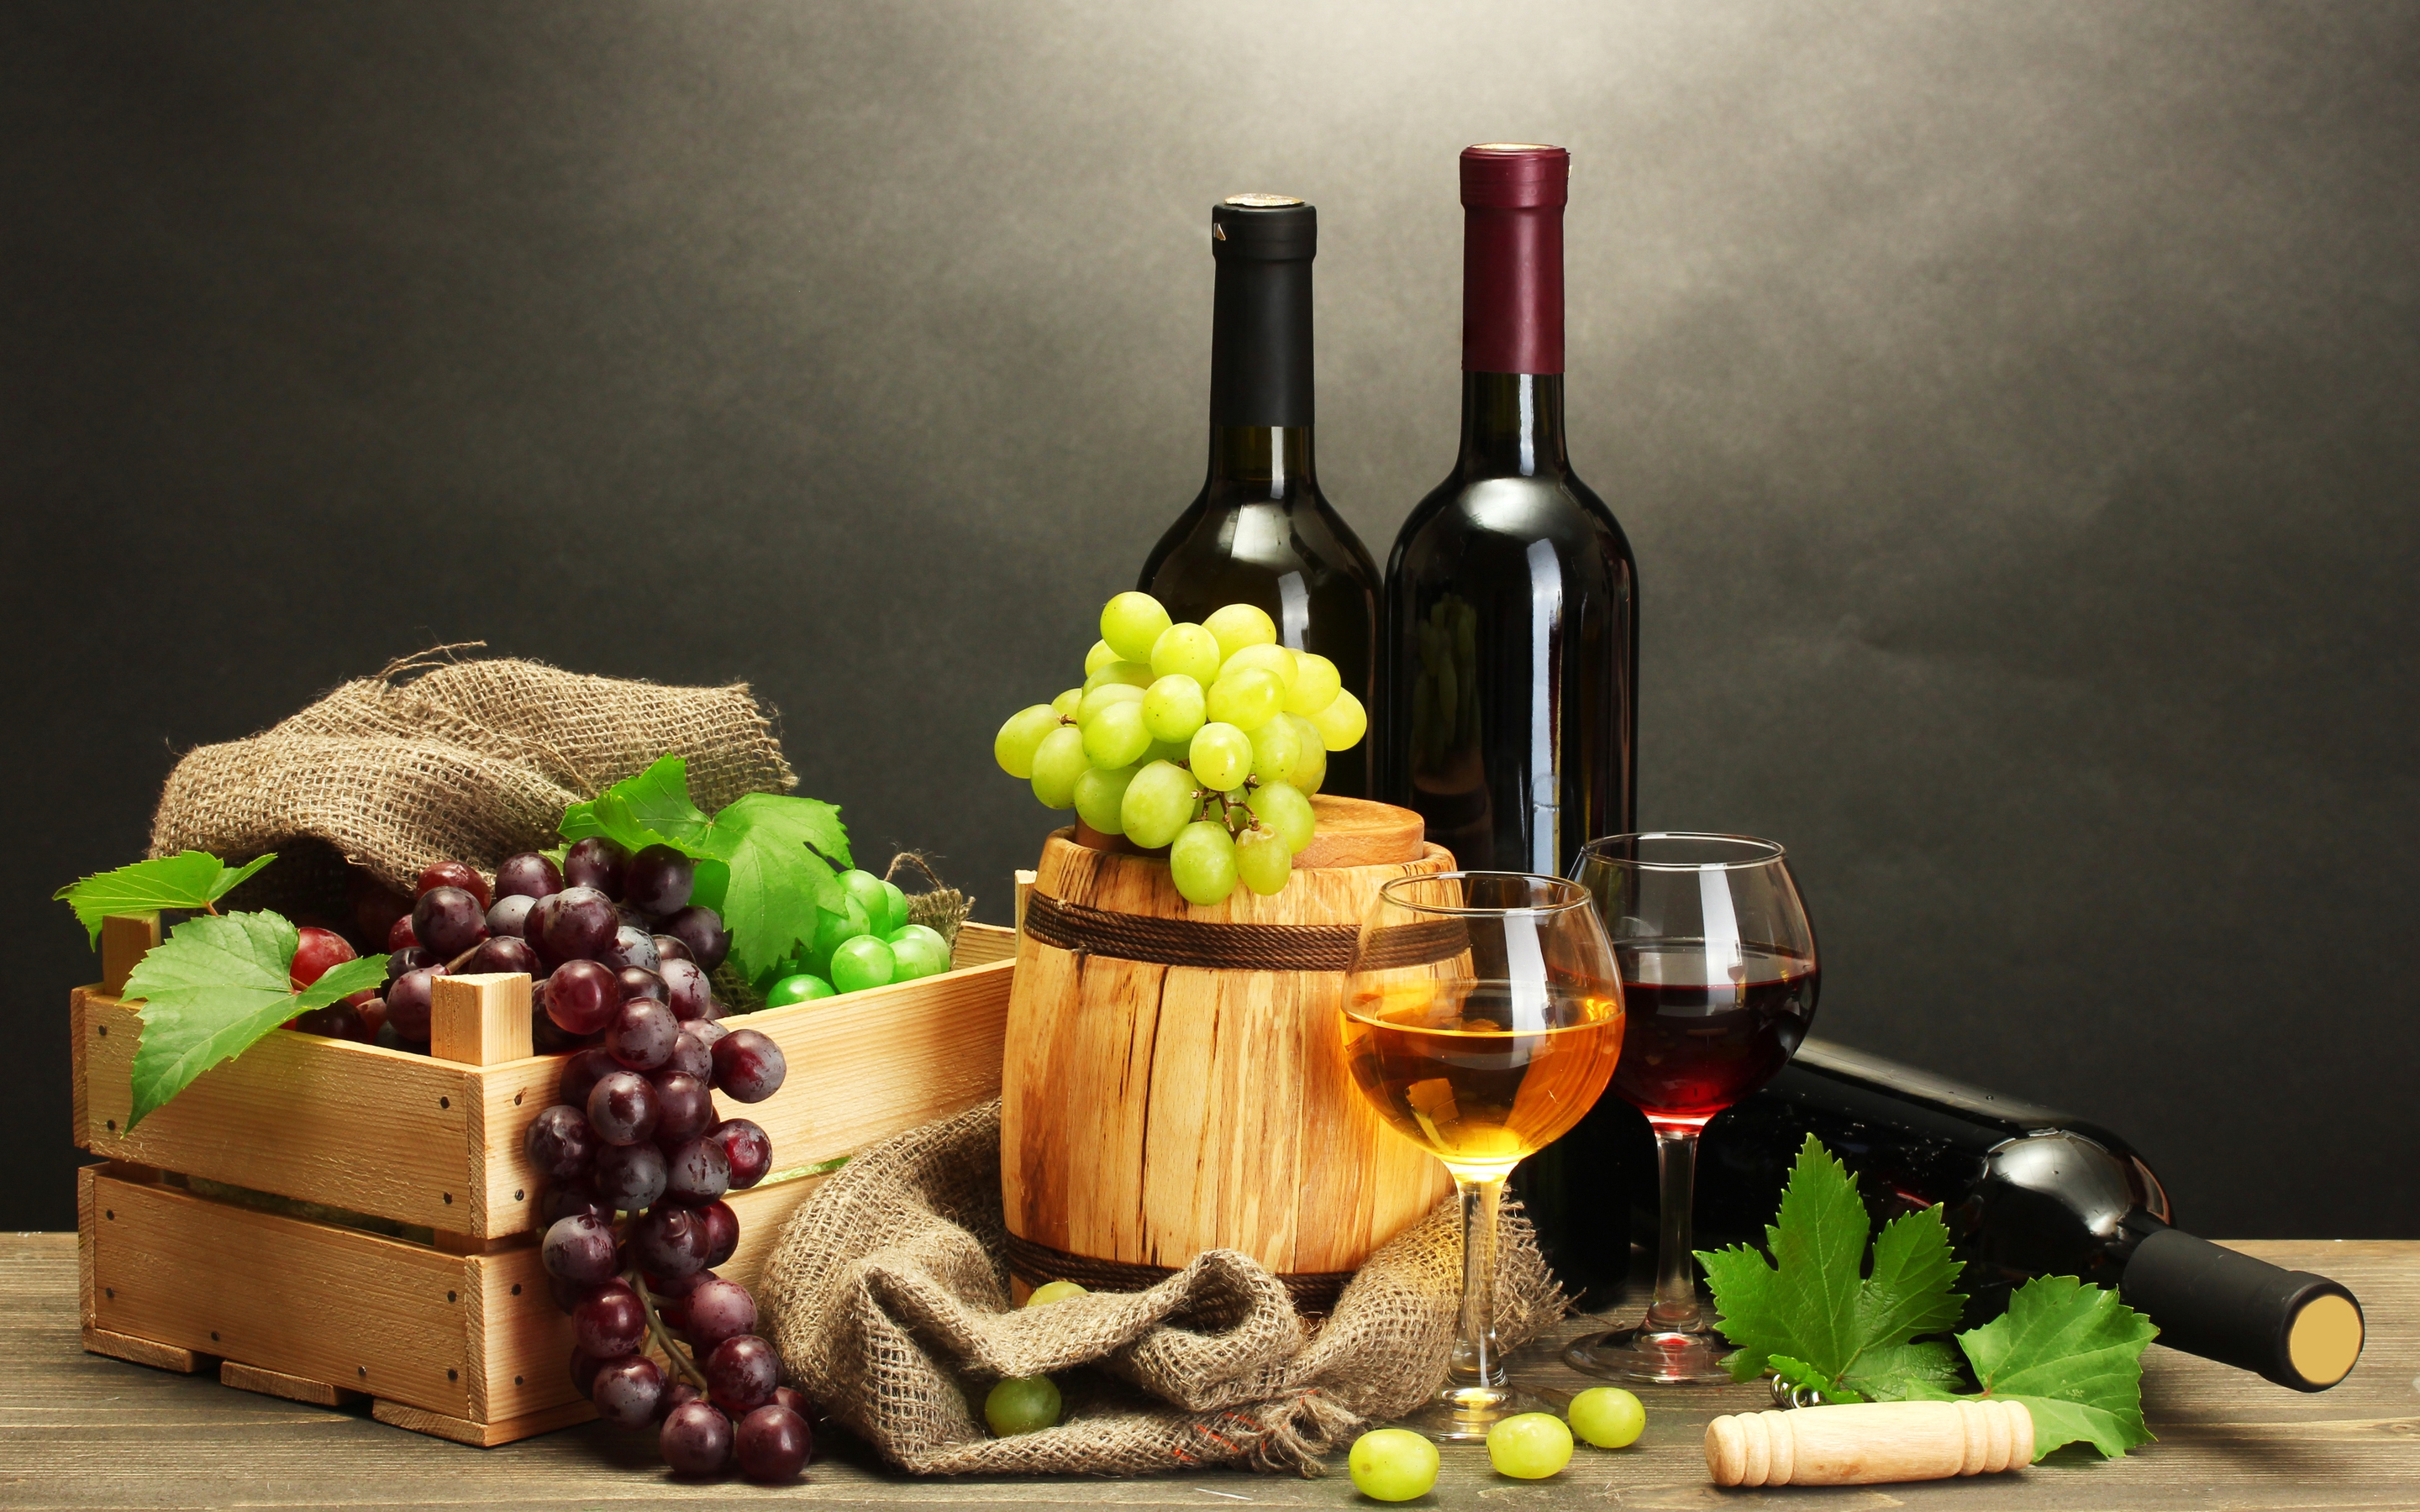 Grapes and Wine for 2880 x 1800 Retina Display resolution